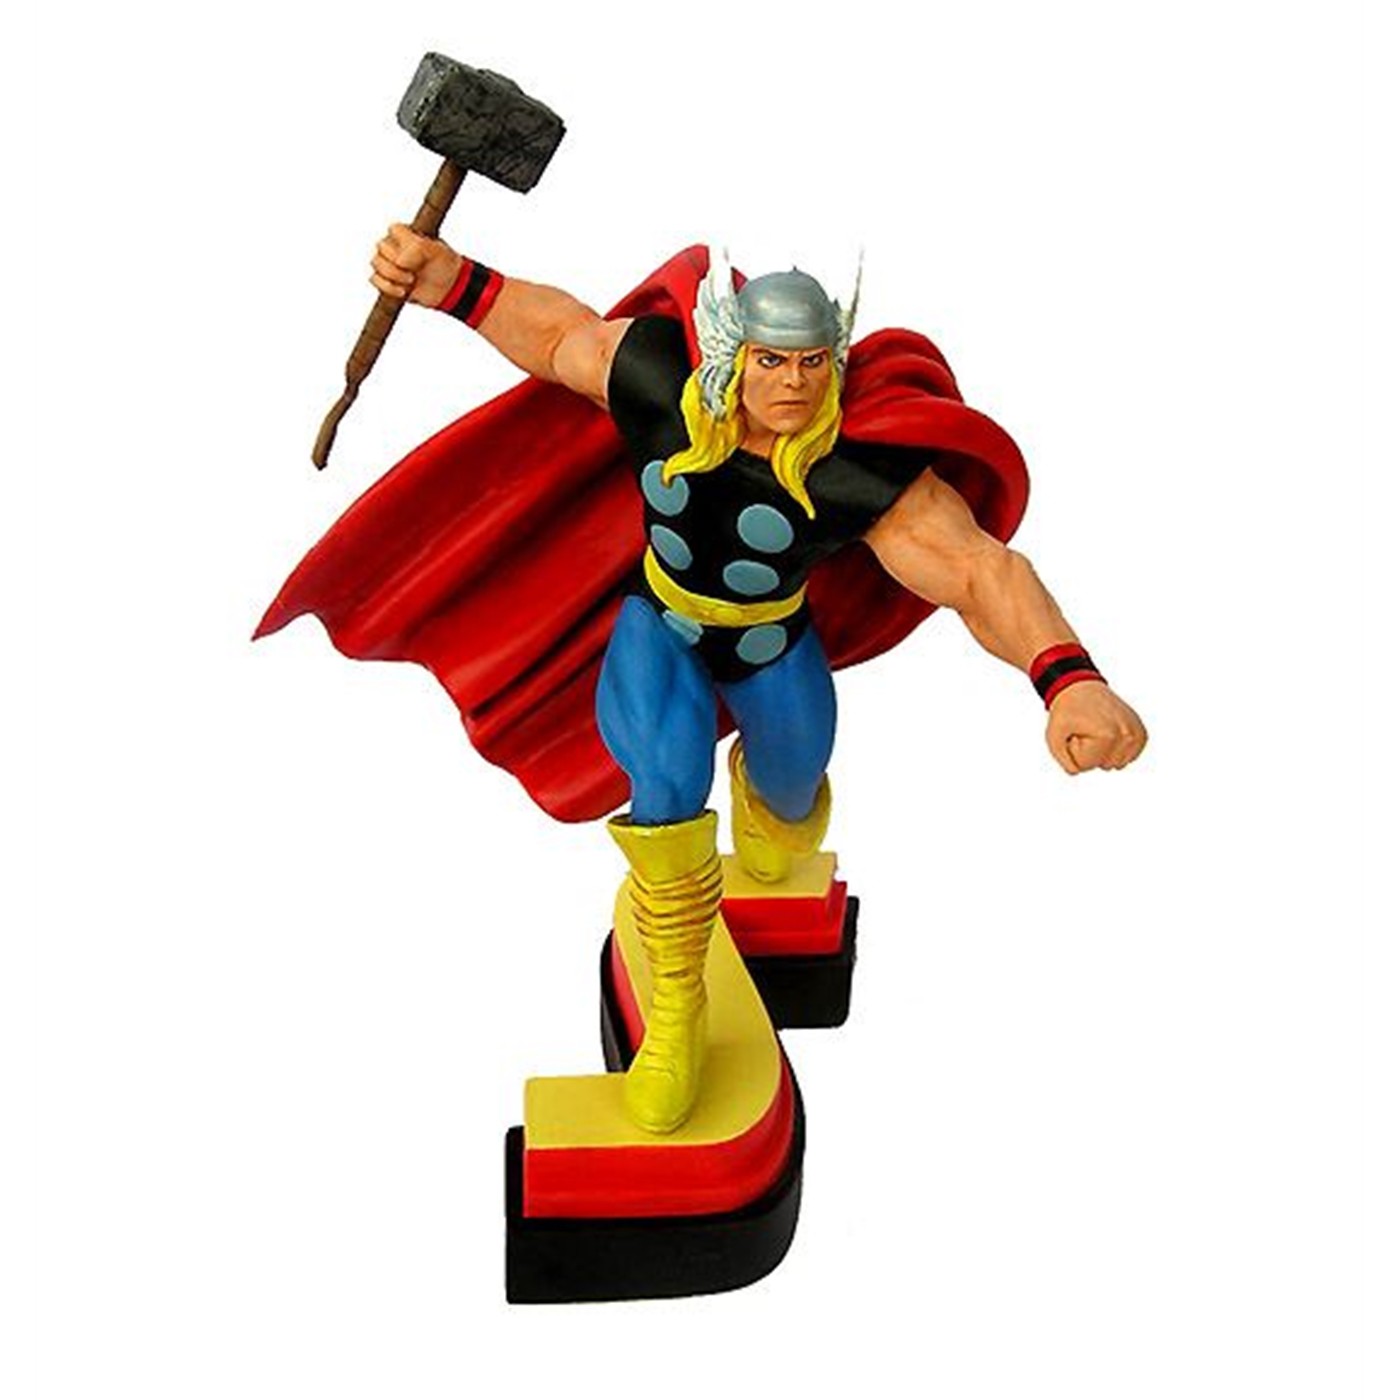 Thor Avengers "S" Figural Paperweight